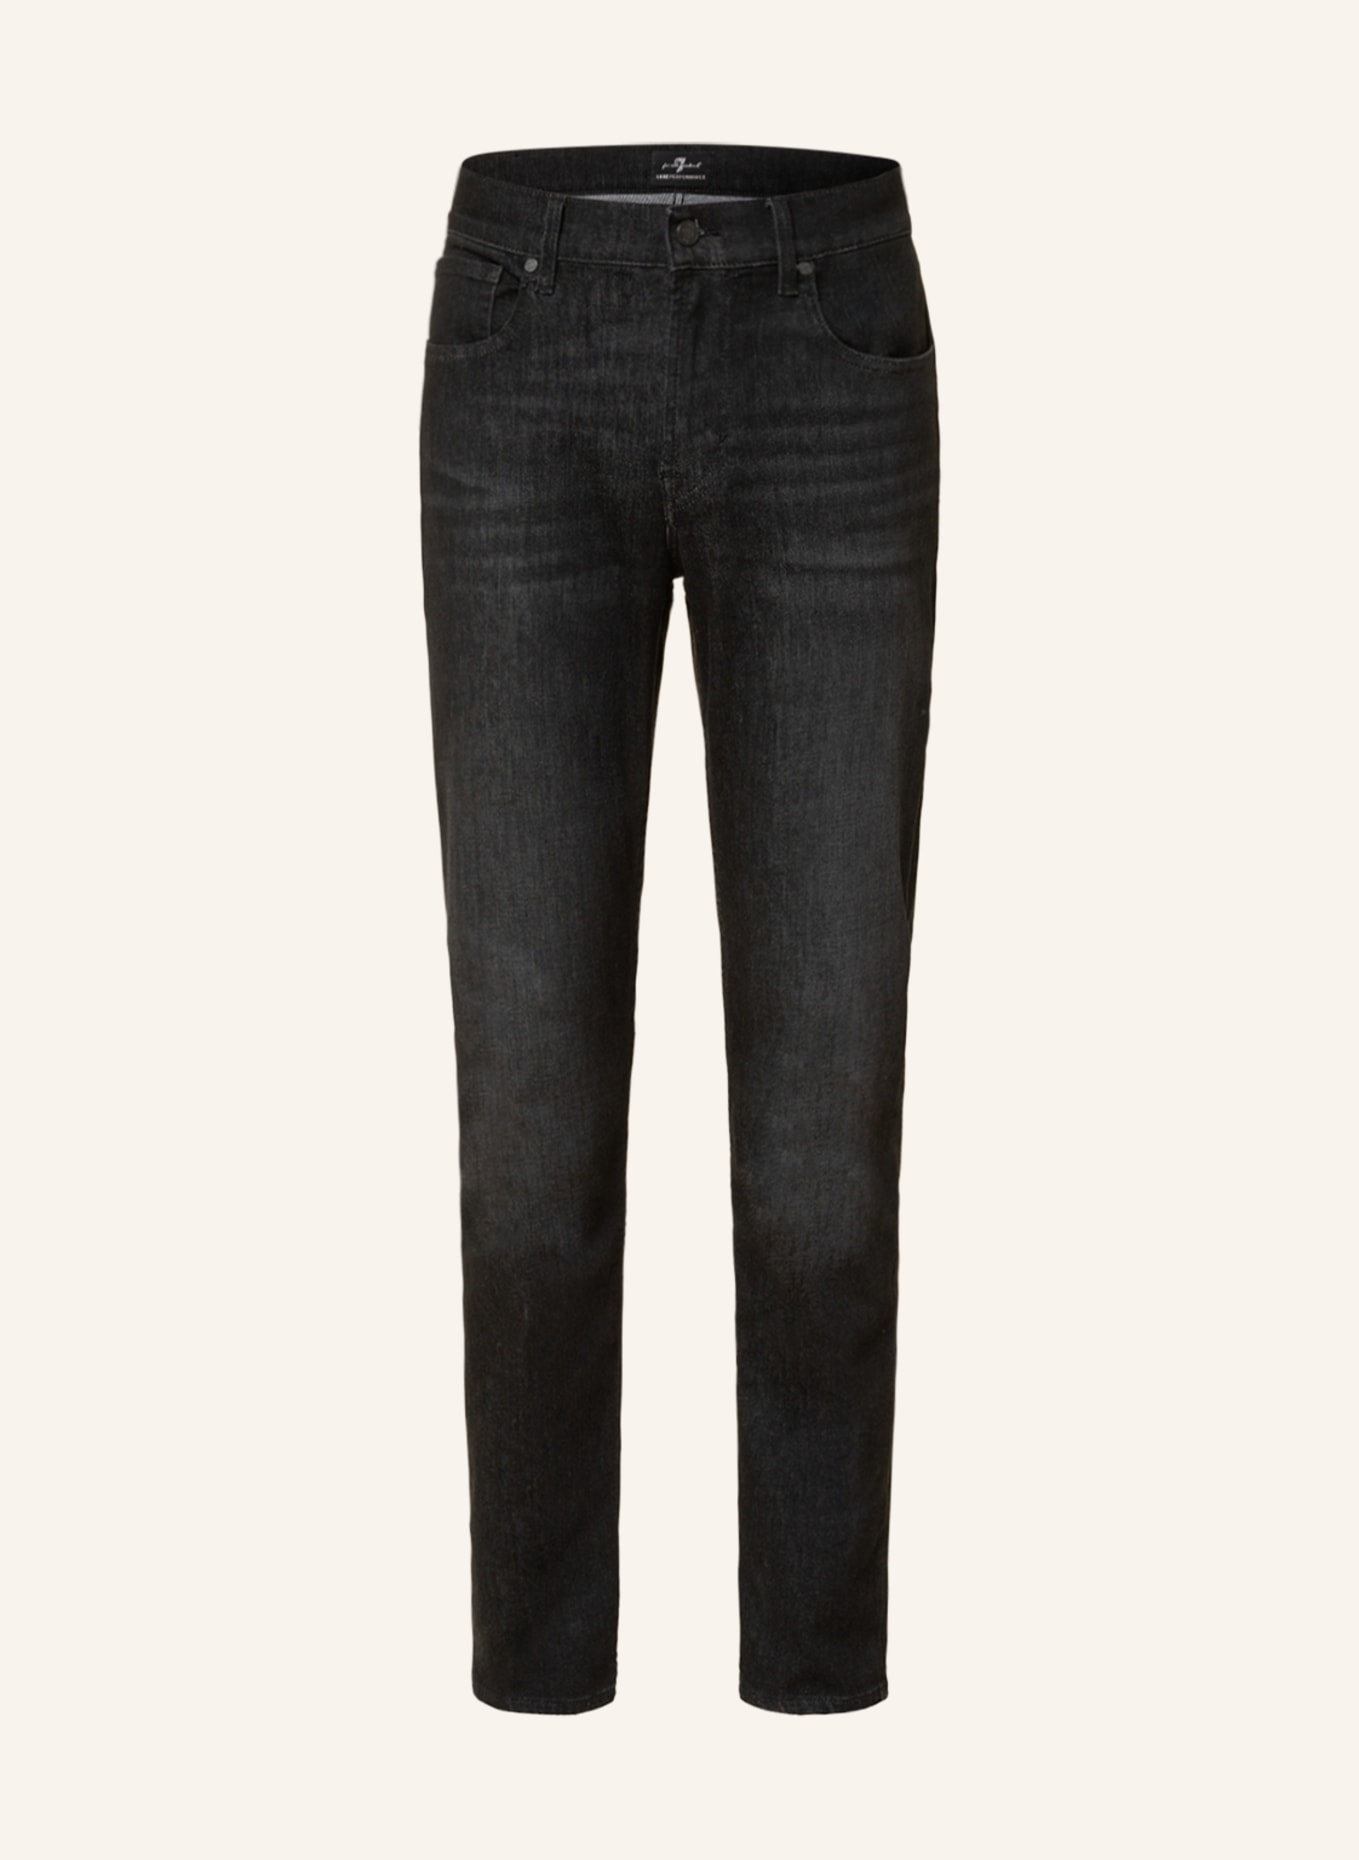 7 for all mankind Jeans SLIMMY Tapered Fit , Farbe: LK Anthra (Bild 1)